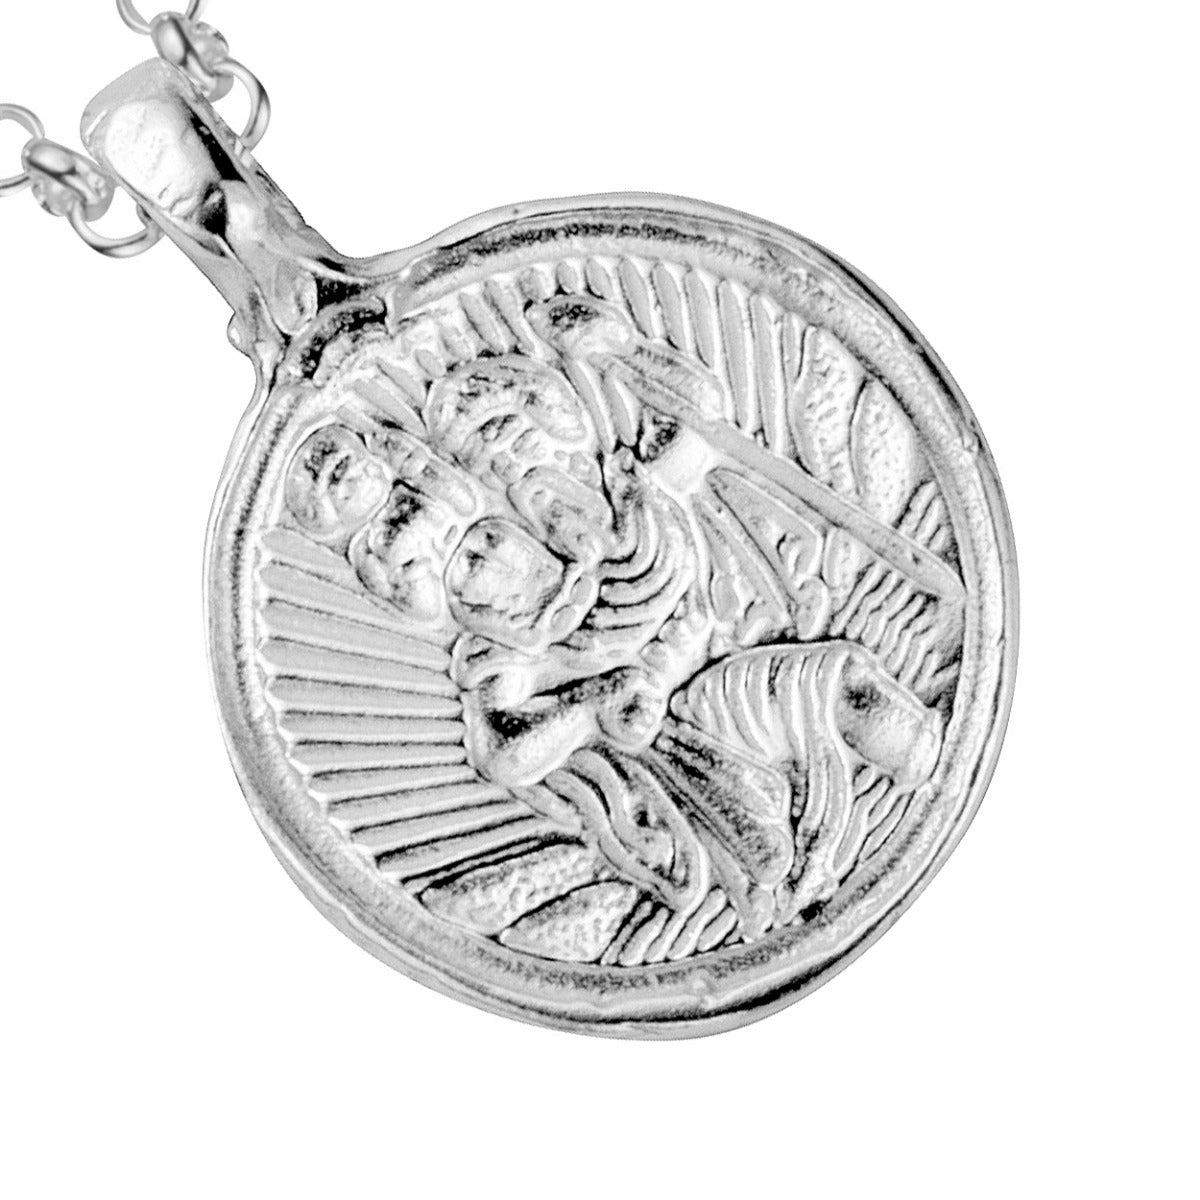 Silver Medium St Christopher Necklace